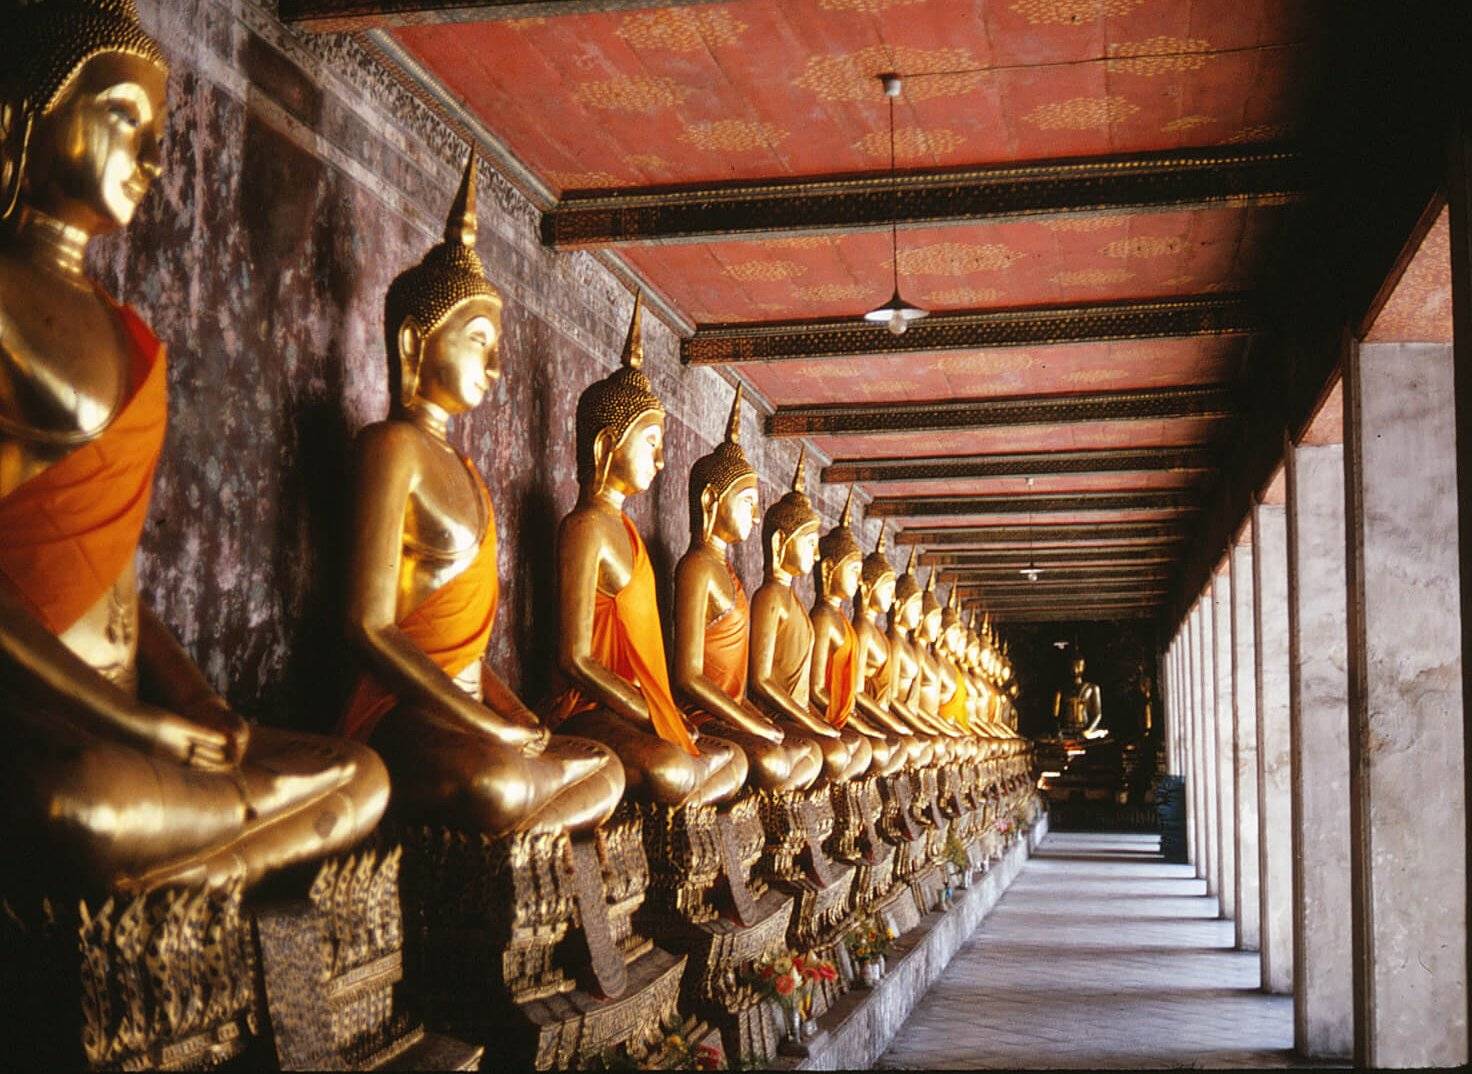 A row of gilded statues, all seated cross-legged and with an orange sash across their torsos.